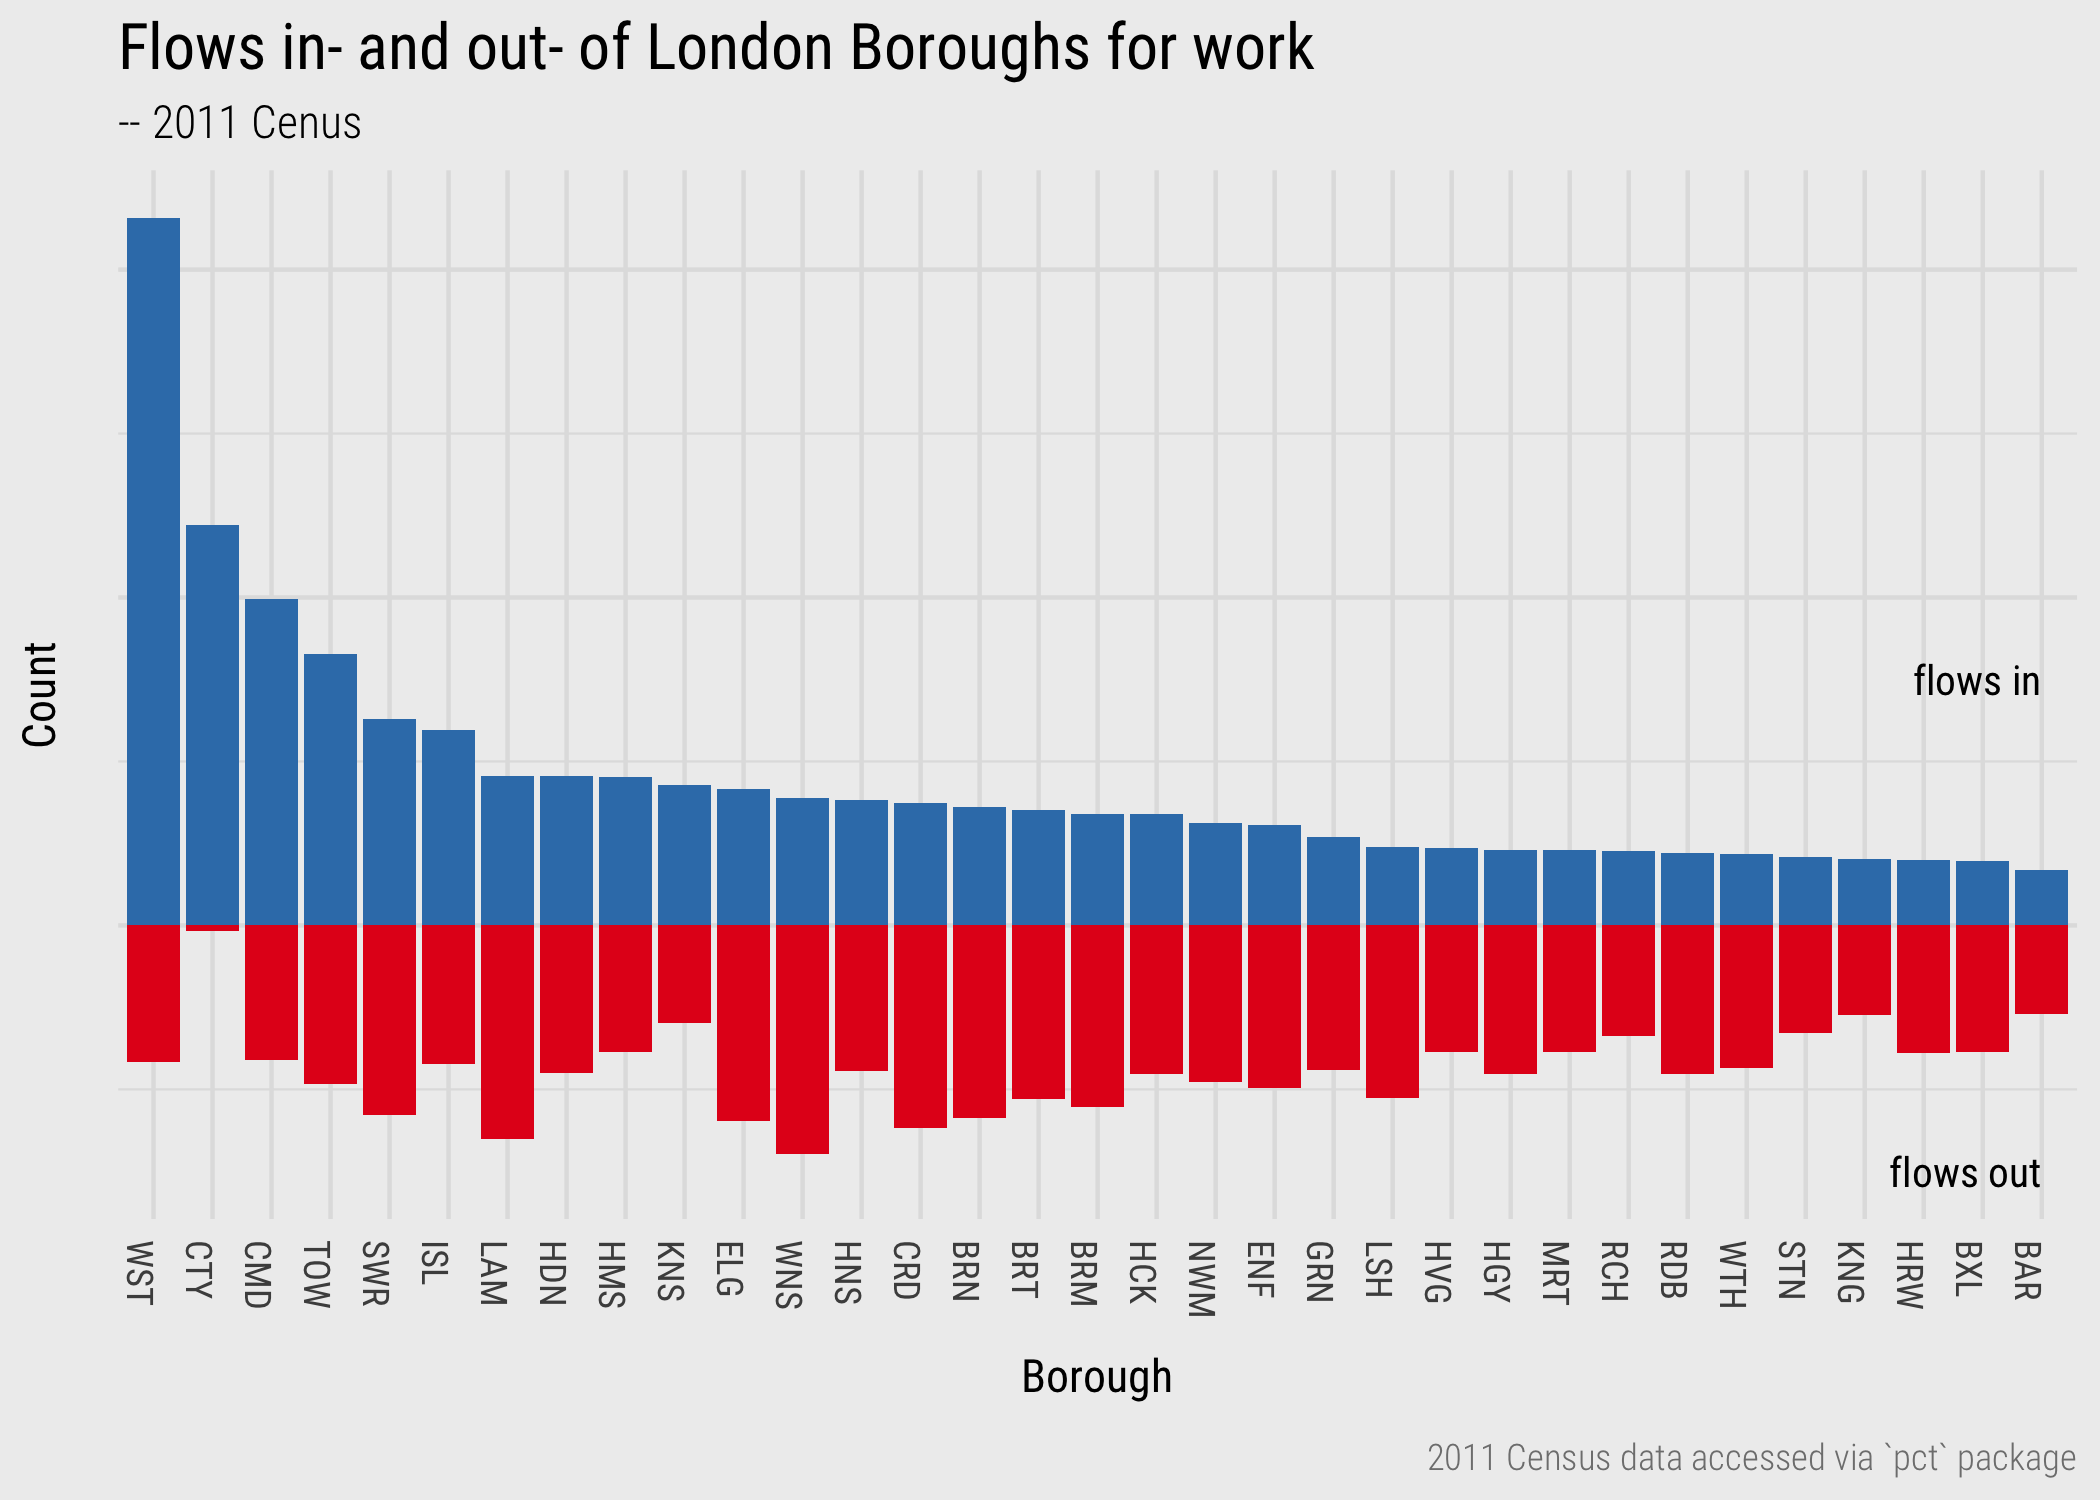 Barchart of commutes in- and out- of London boroughs.